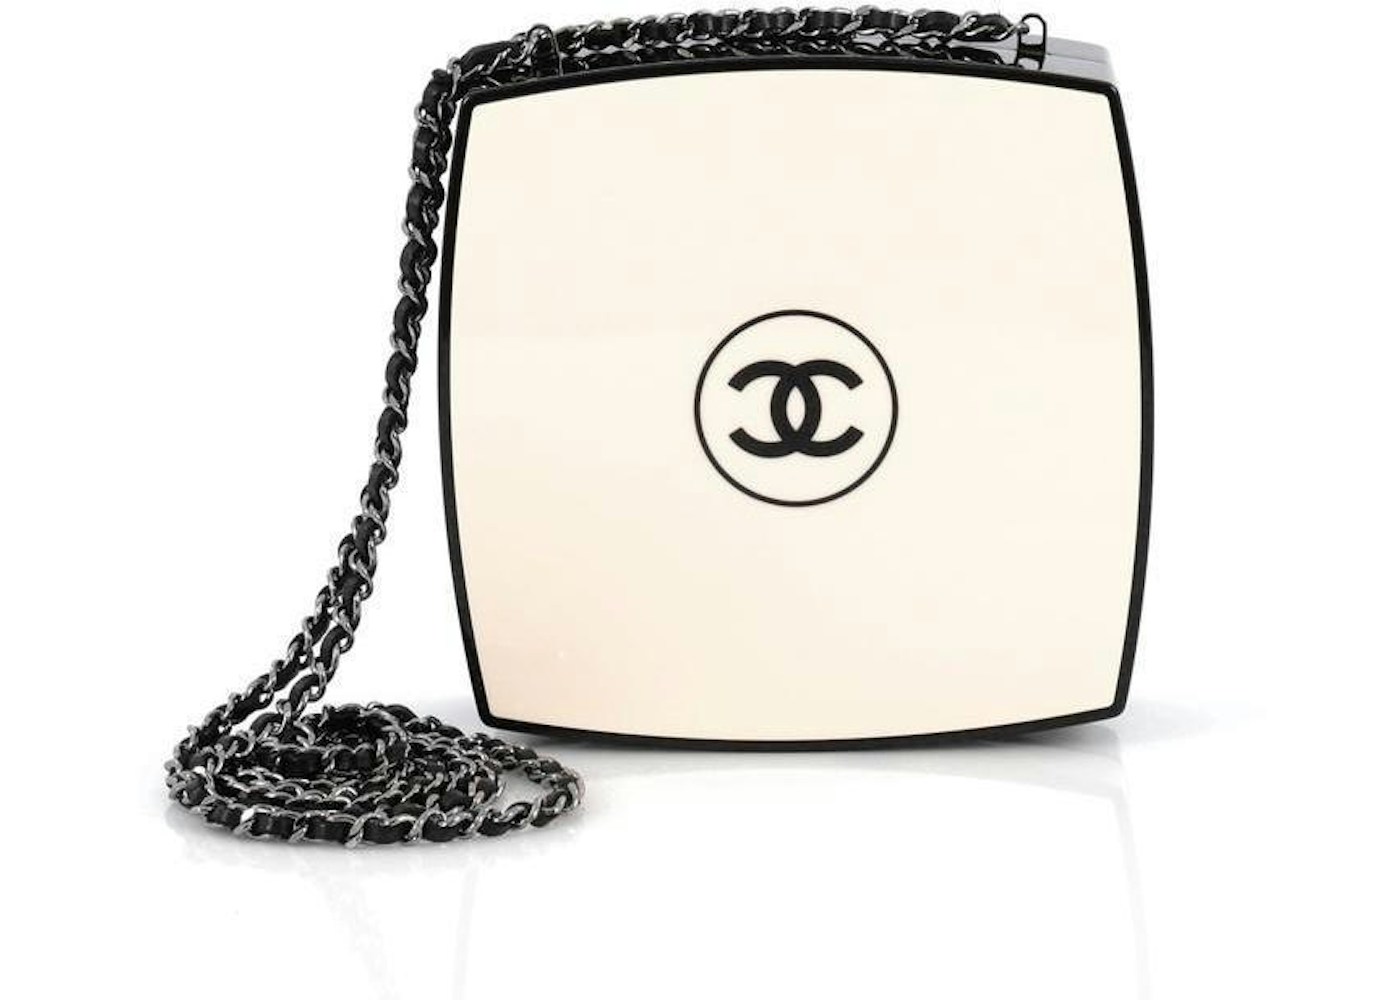 Chanel CC Minaudiere Compact Small Nude